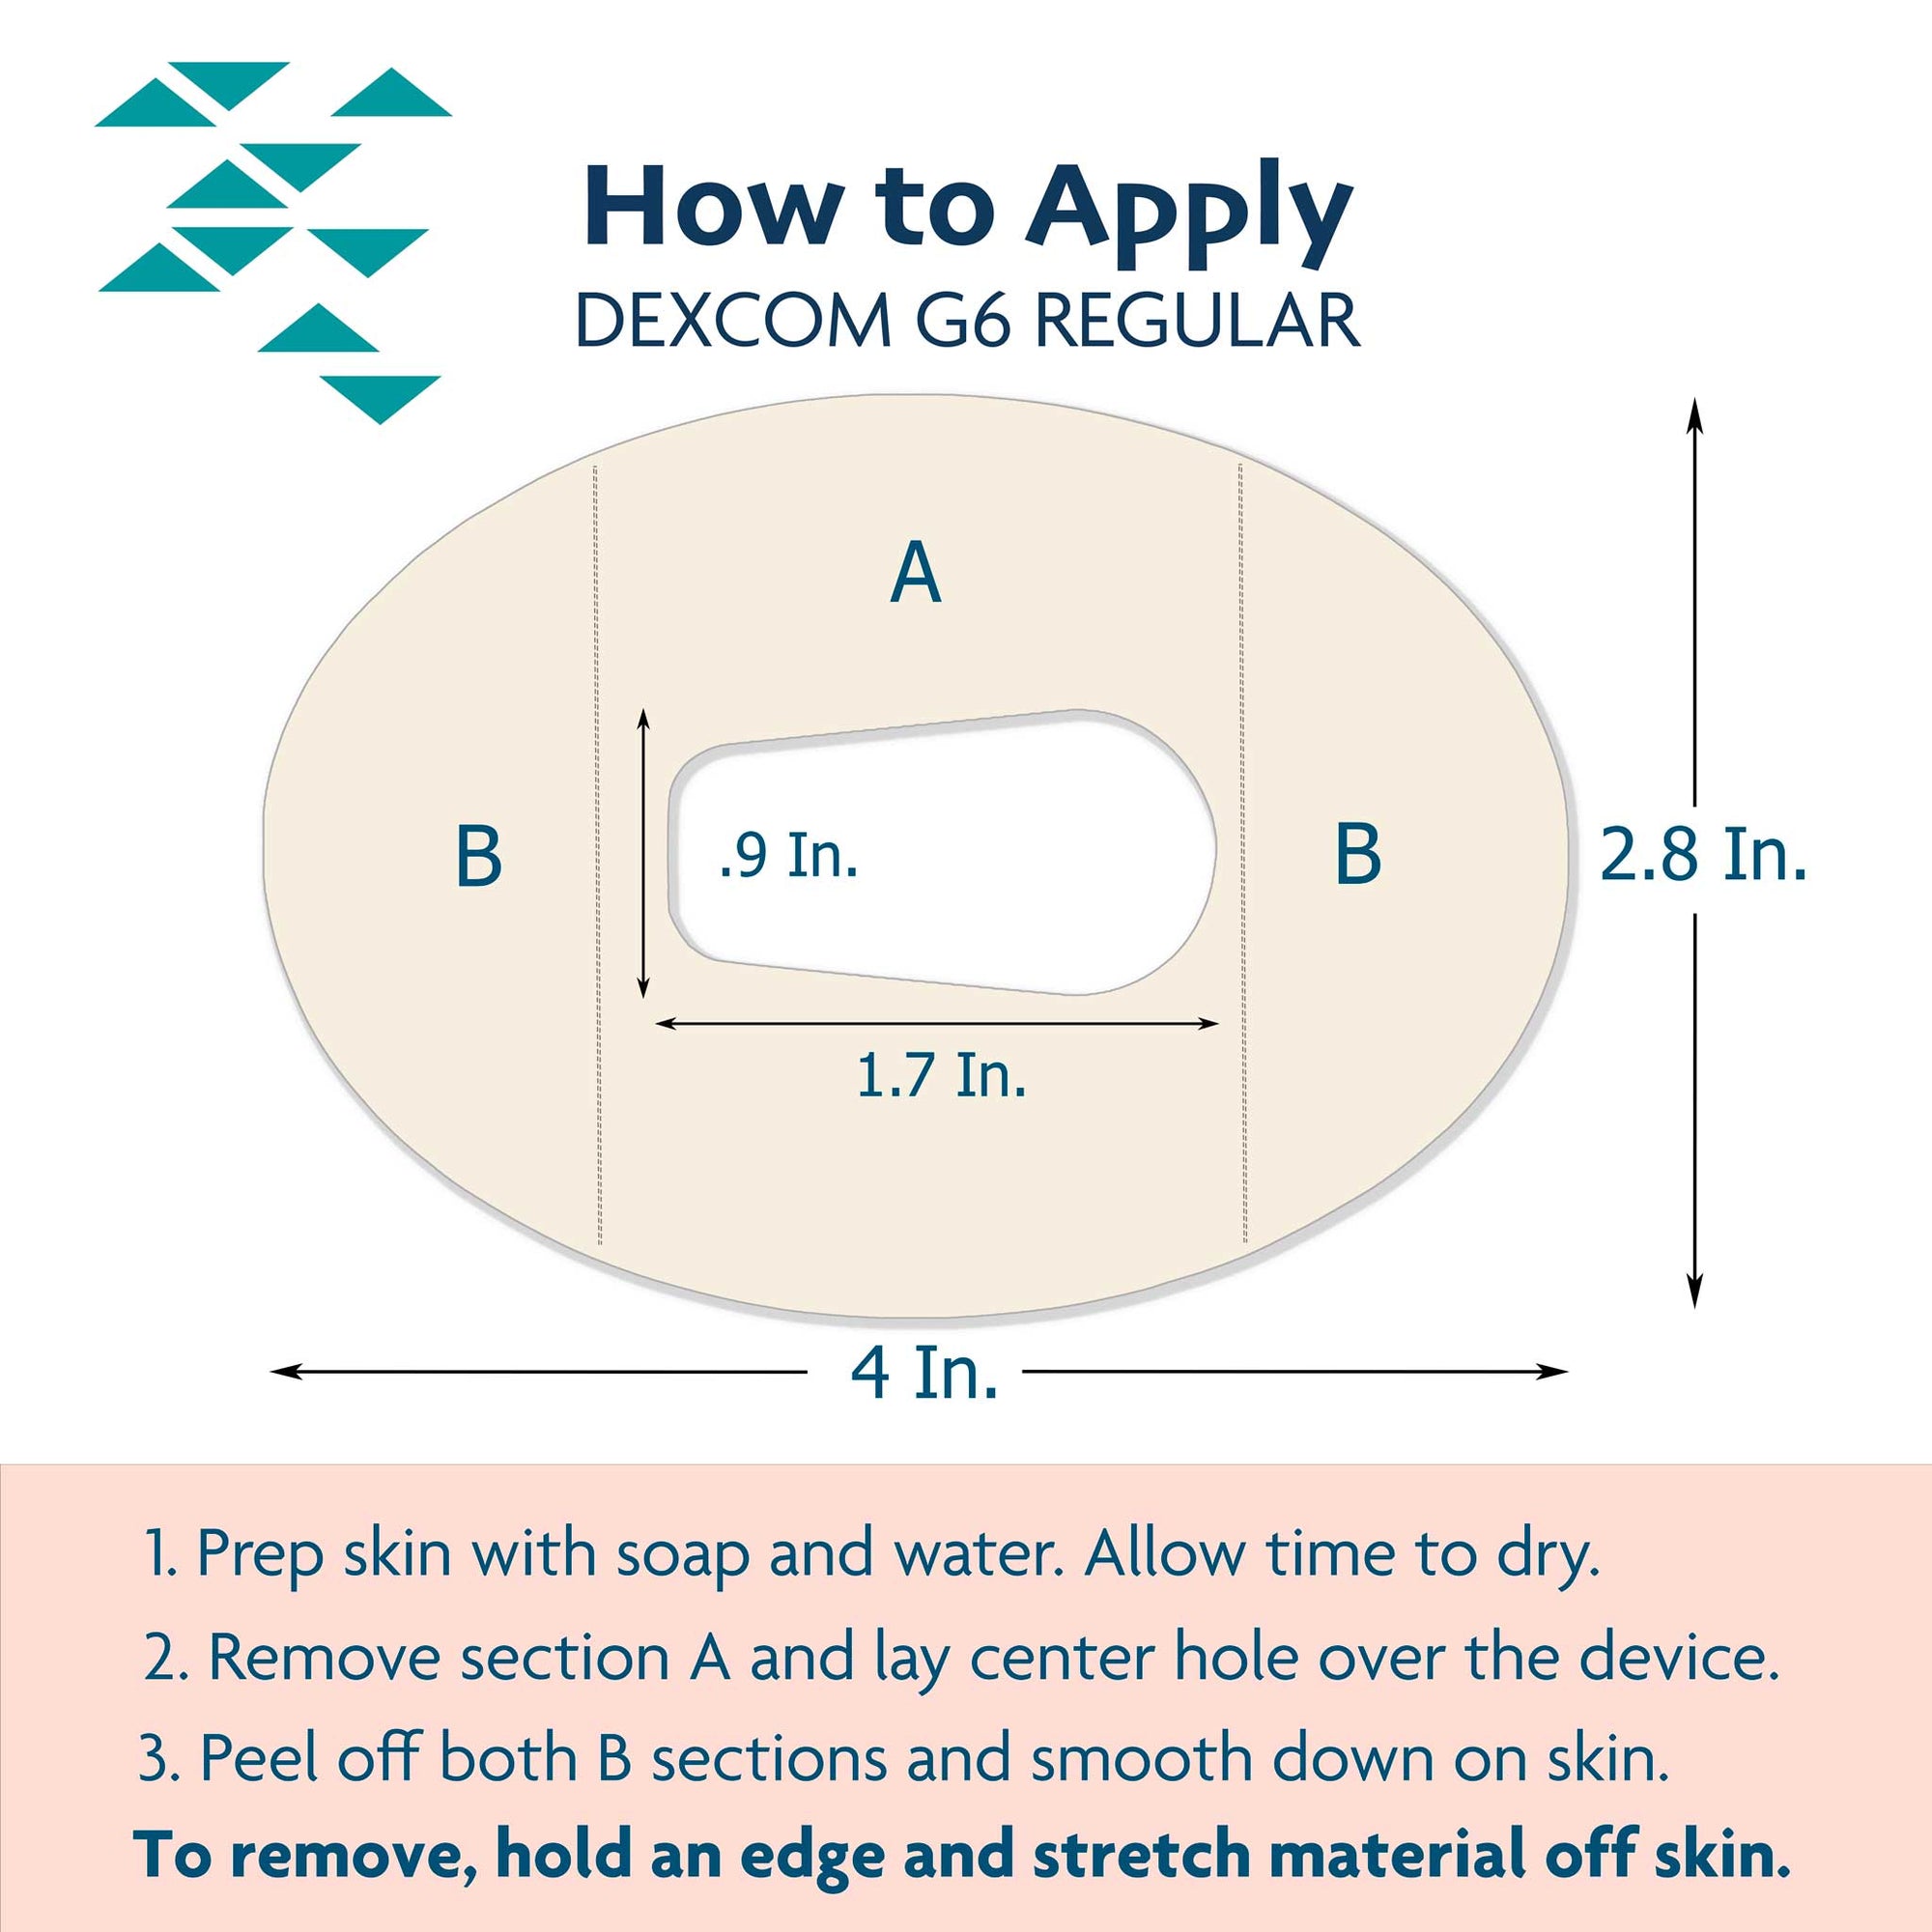 ExpressionMed Dexcom G6 Patch application tutorial for properly securing your CGM